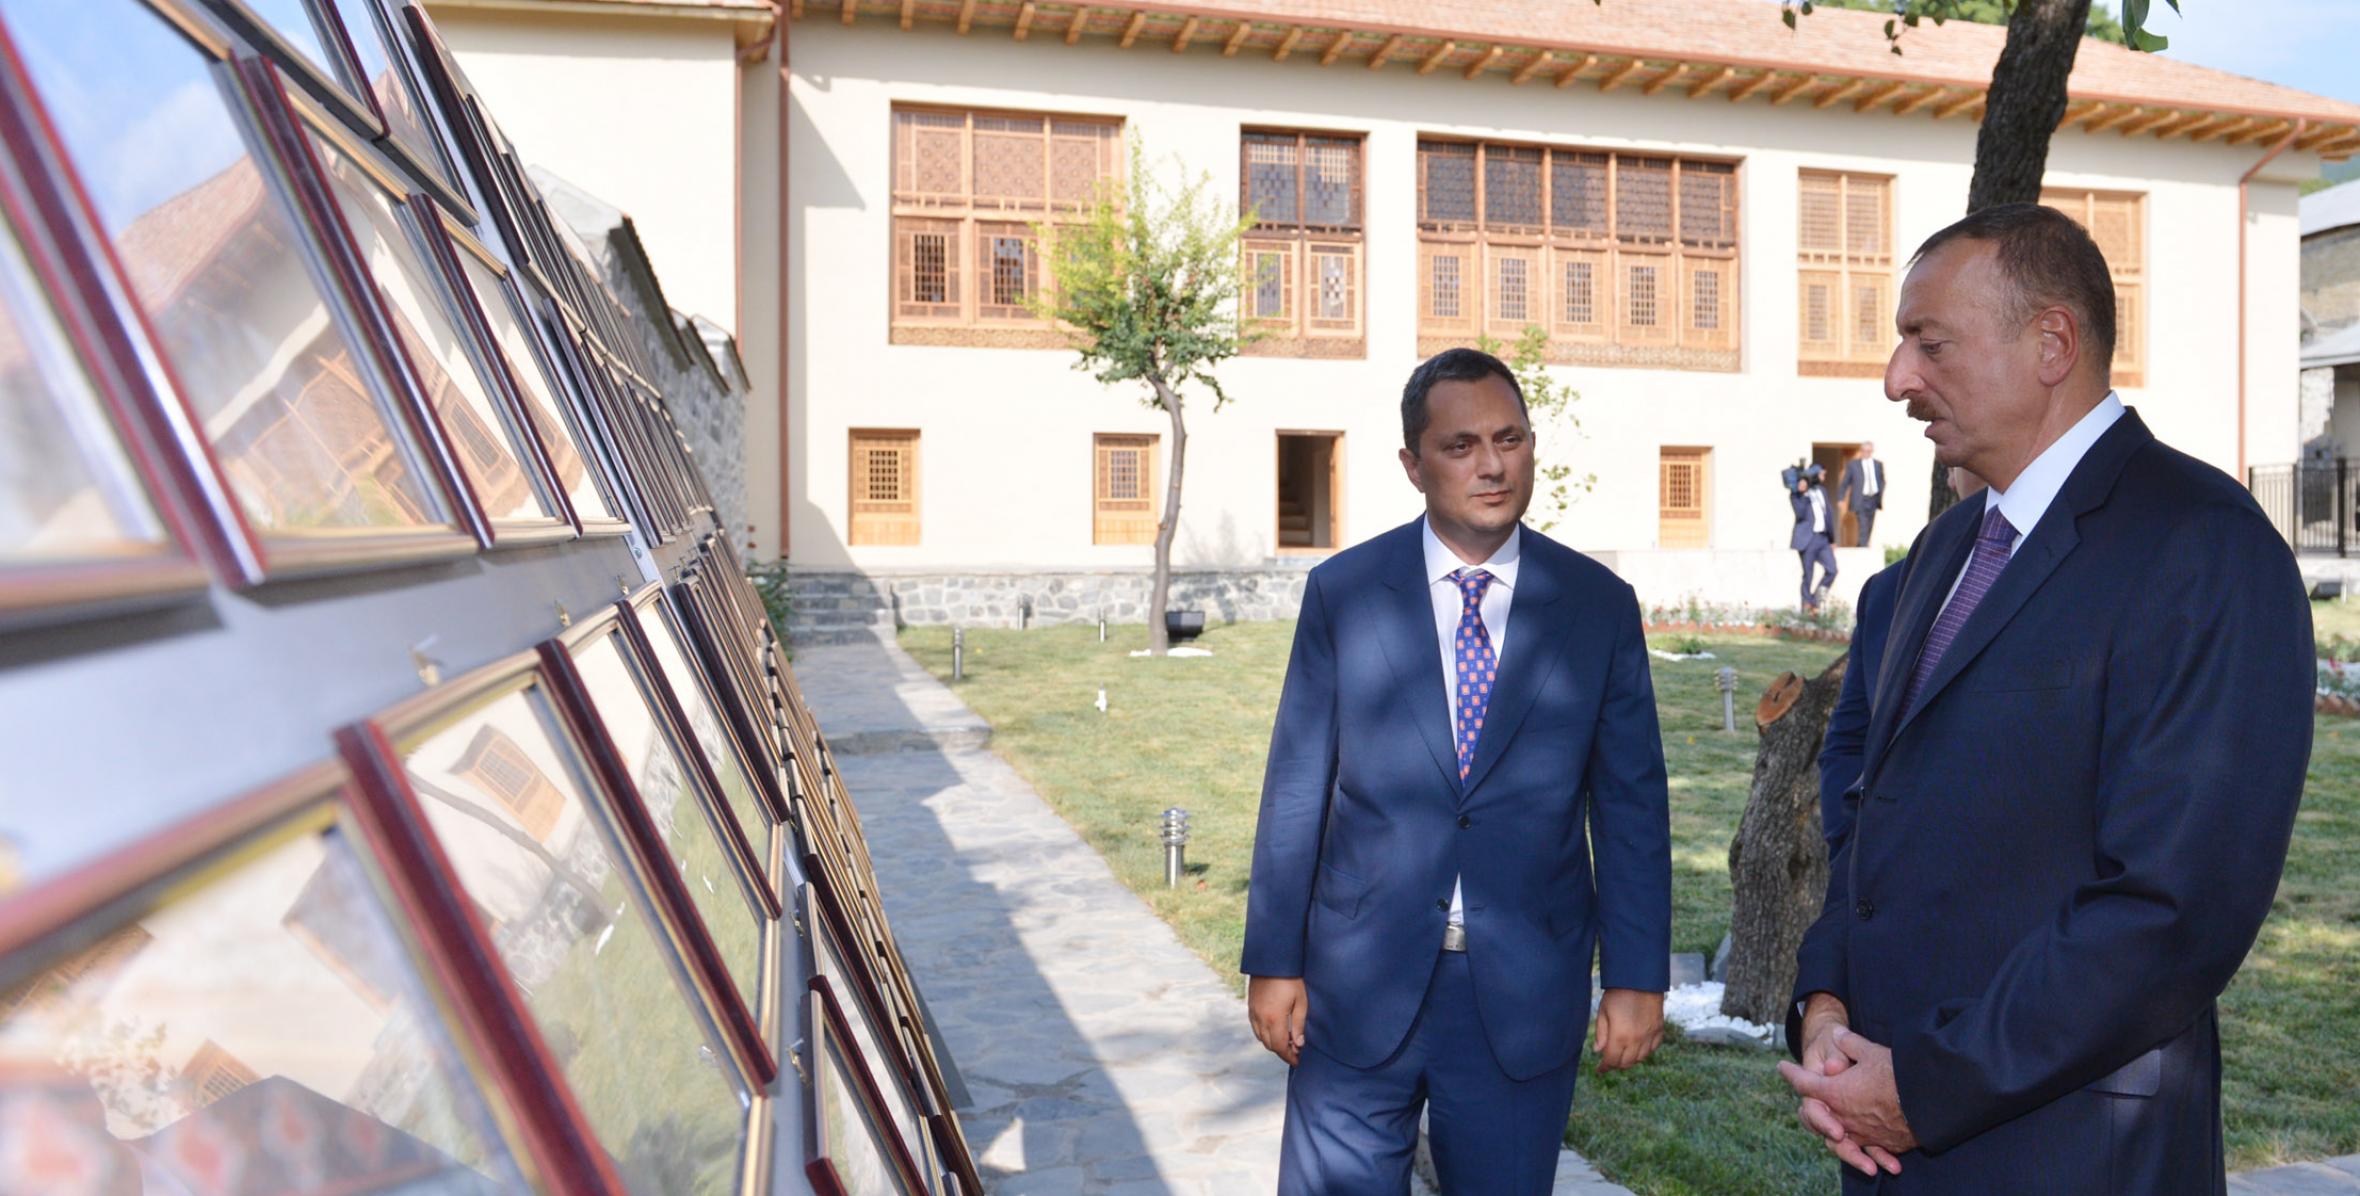 Ilham Aliyev attended the opening of the 18th century “House of Shaki Khans”, a historical and architectural monument which has been commissioned after major overhaul and reconstruction